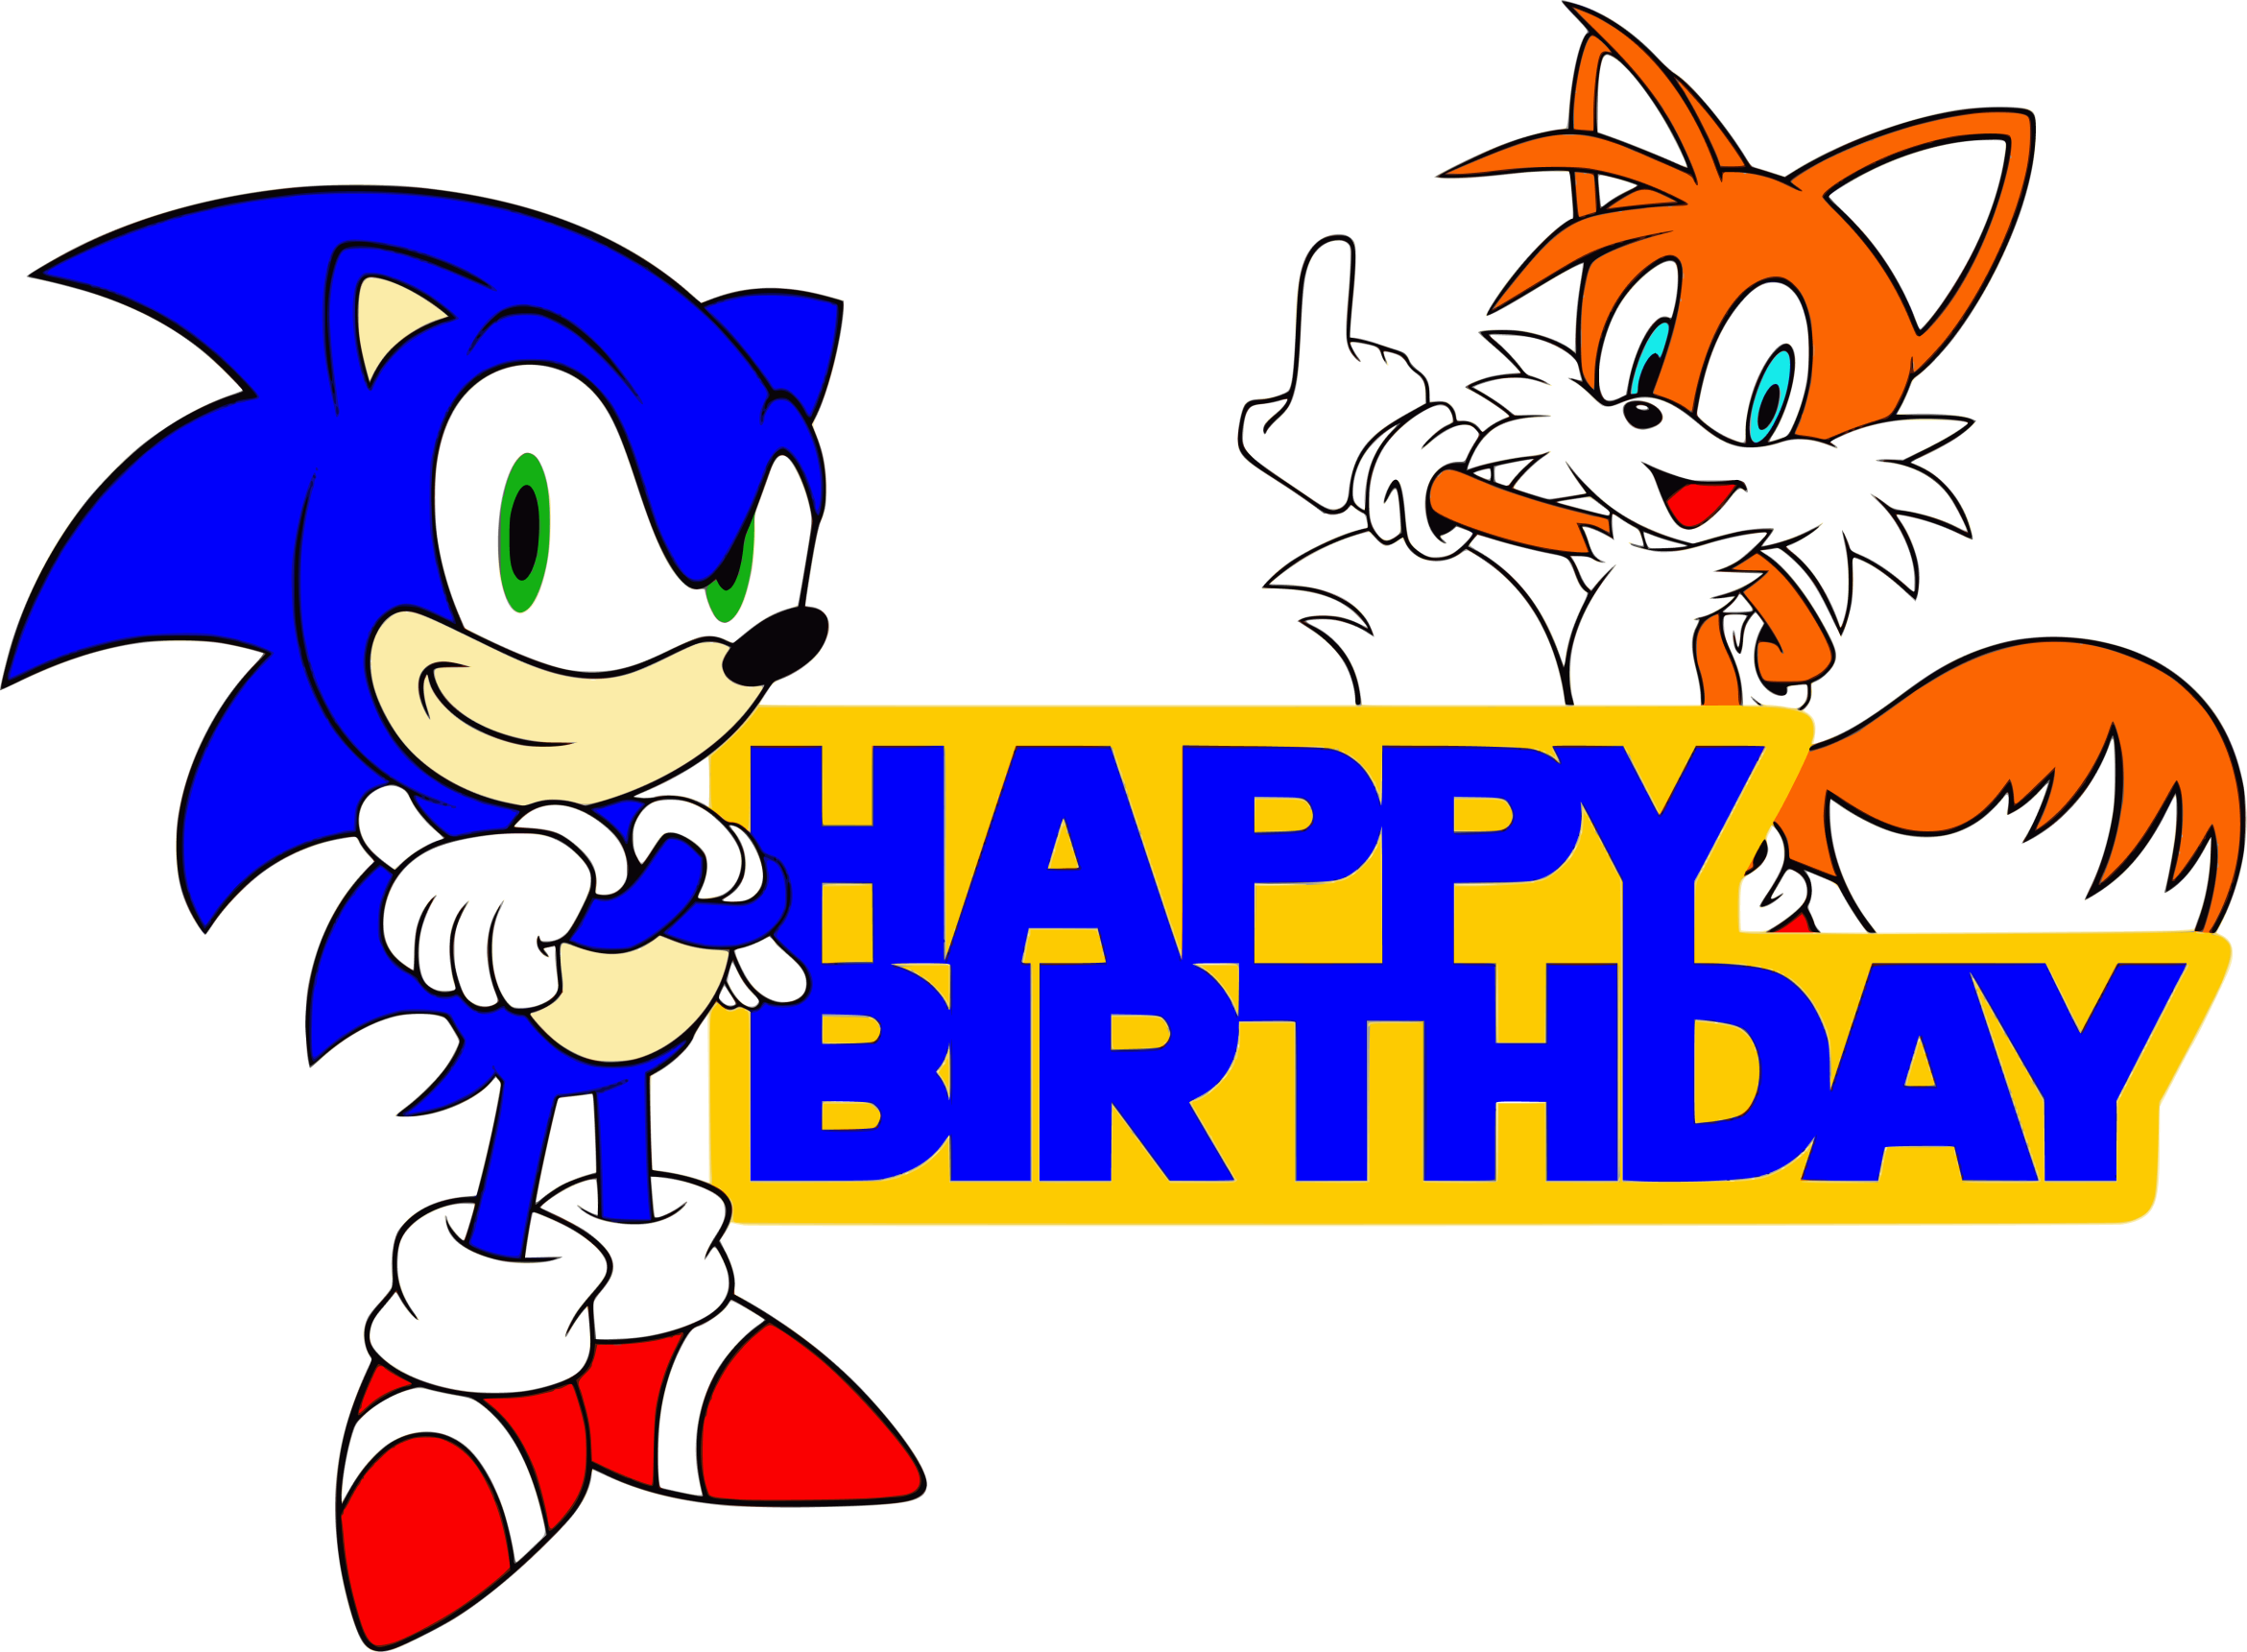 Cute sonic image with "Happy Birthday" caption.